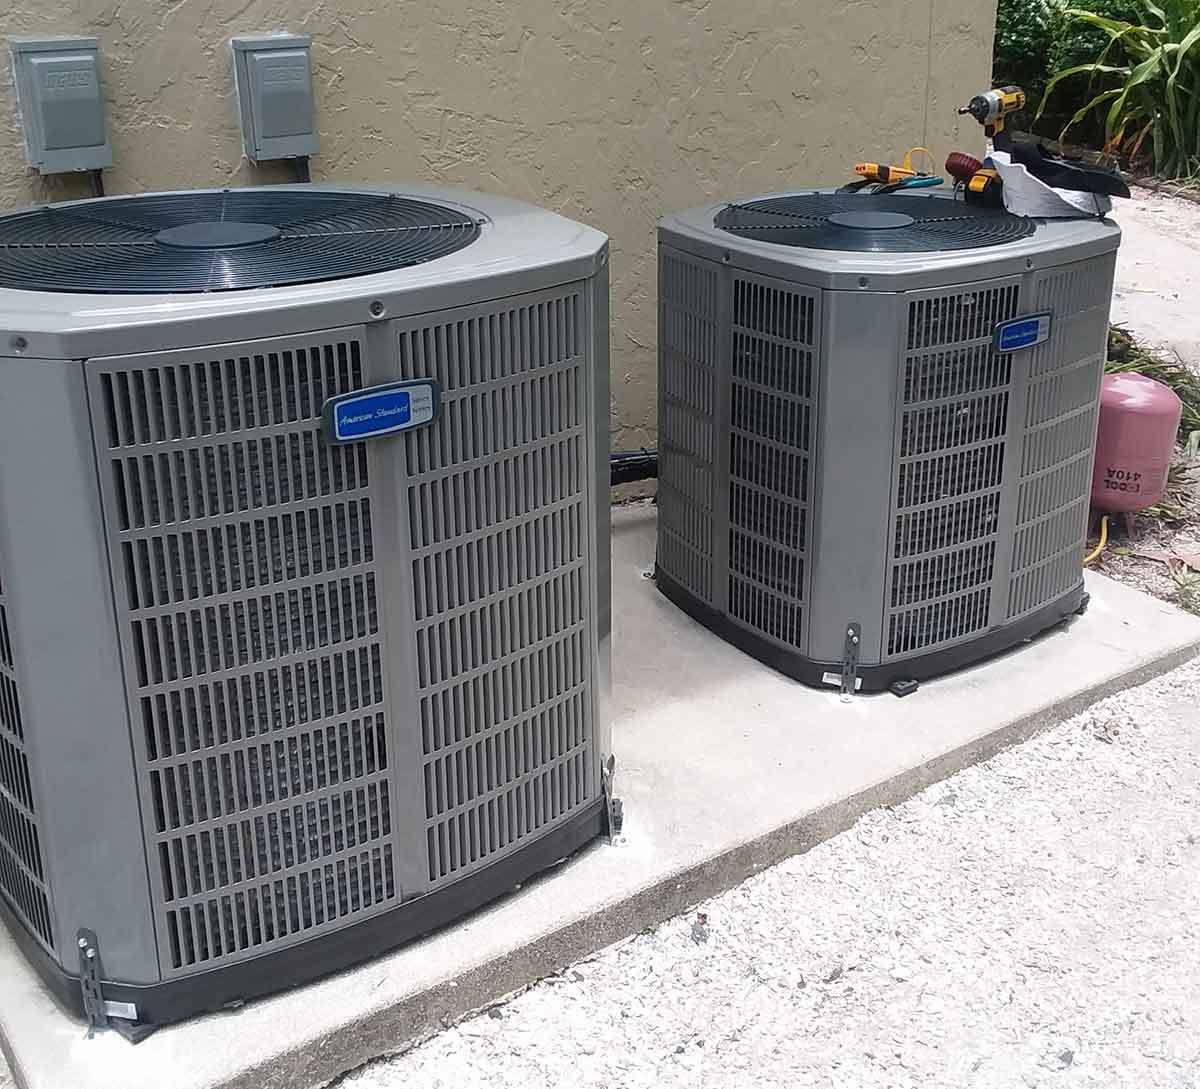 Portable Air Conditioning Projects